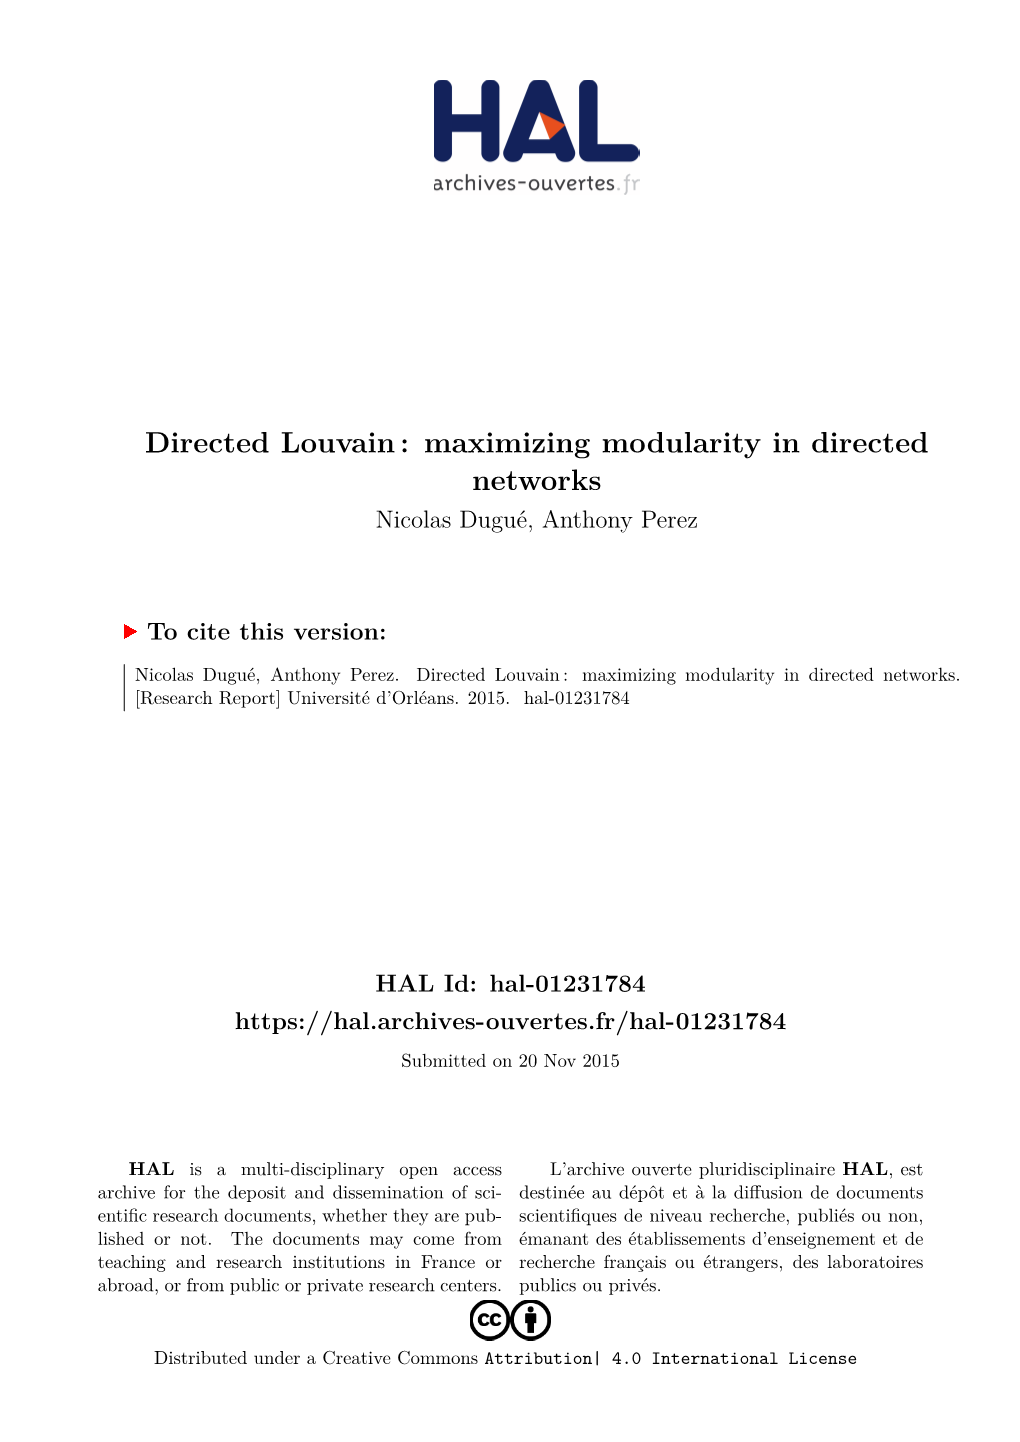 Directed Louvain: Maximizing Modularity in Directed Networks